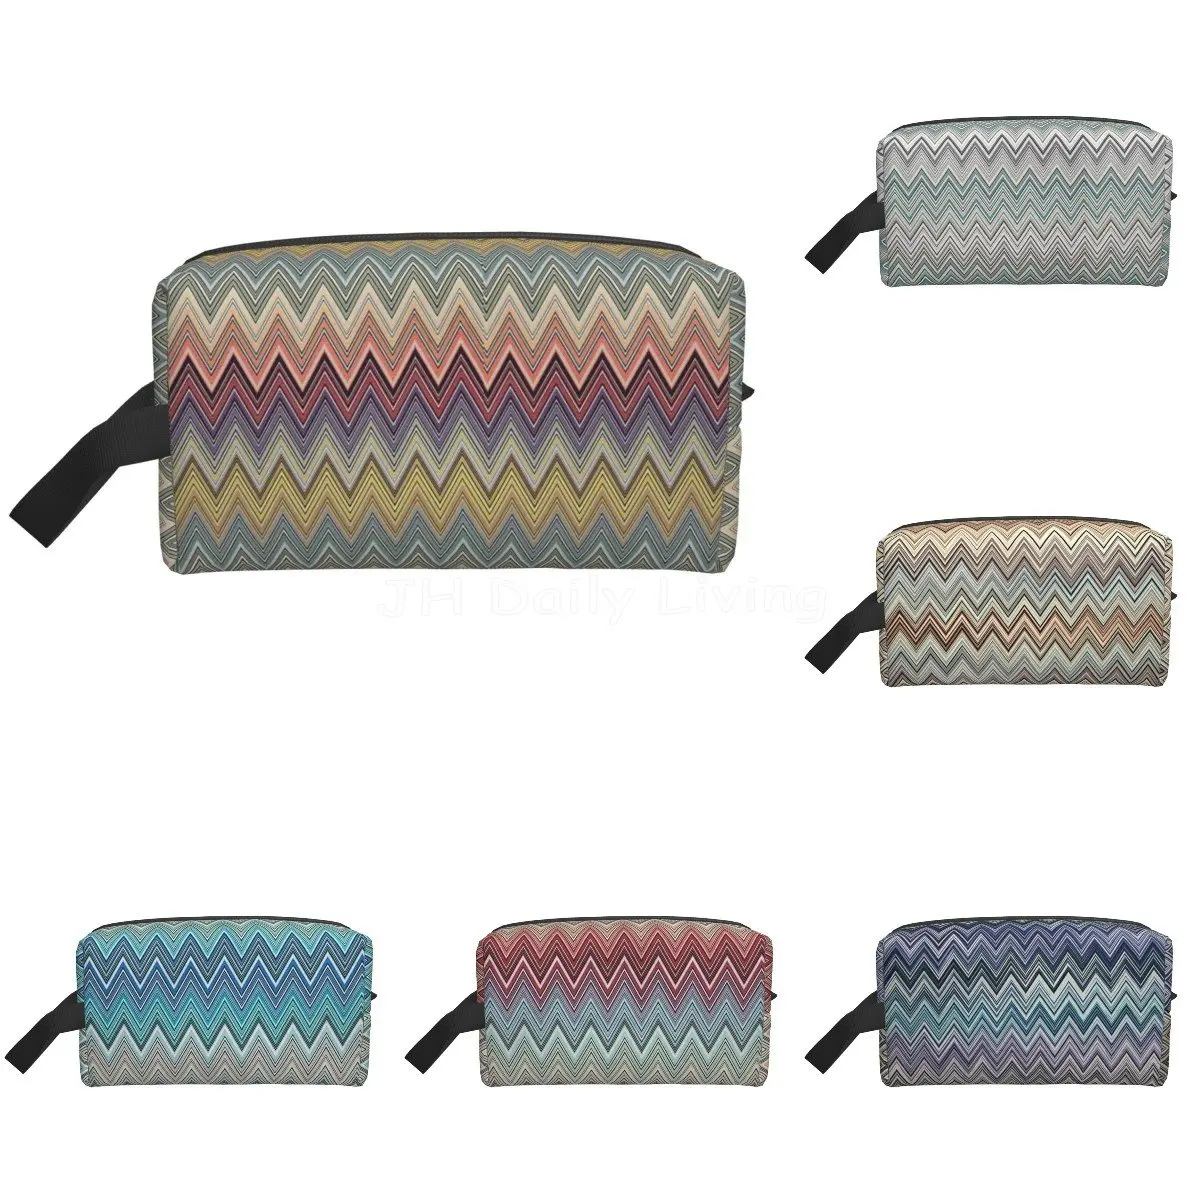 

Custom Bohemian Chic Zigzag Storage Toiletry Bags Colorful Layers Zigzag Cosmetic Bag Women Cute Large Capacity Makeup Case